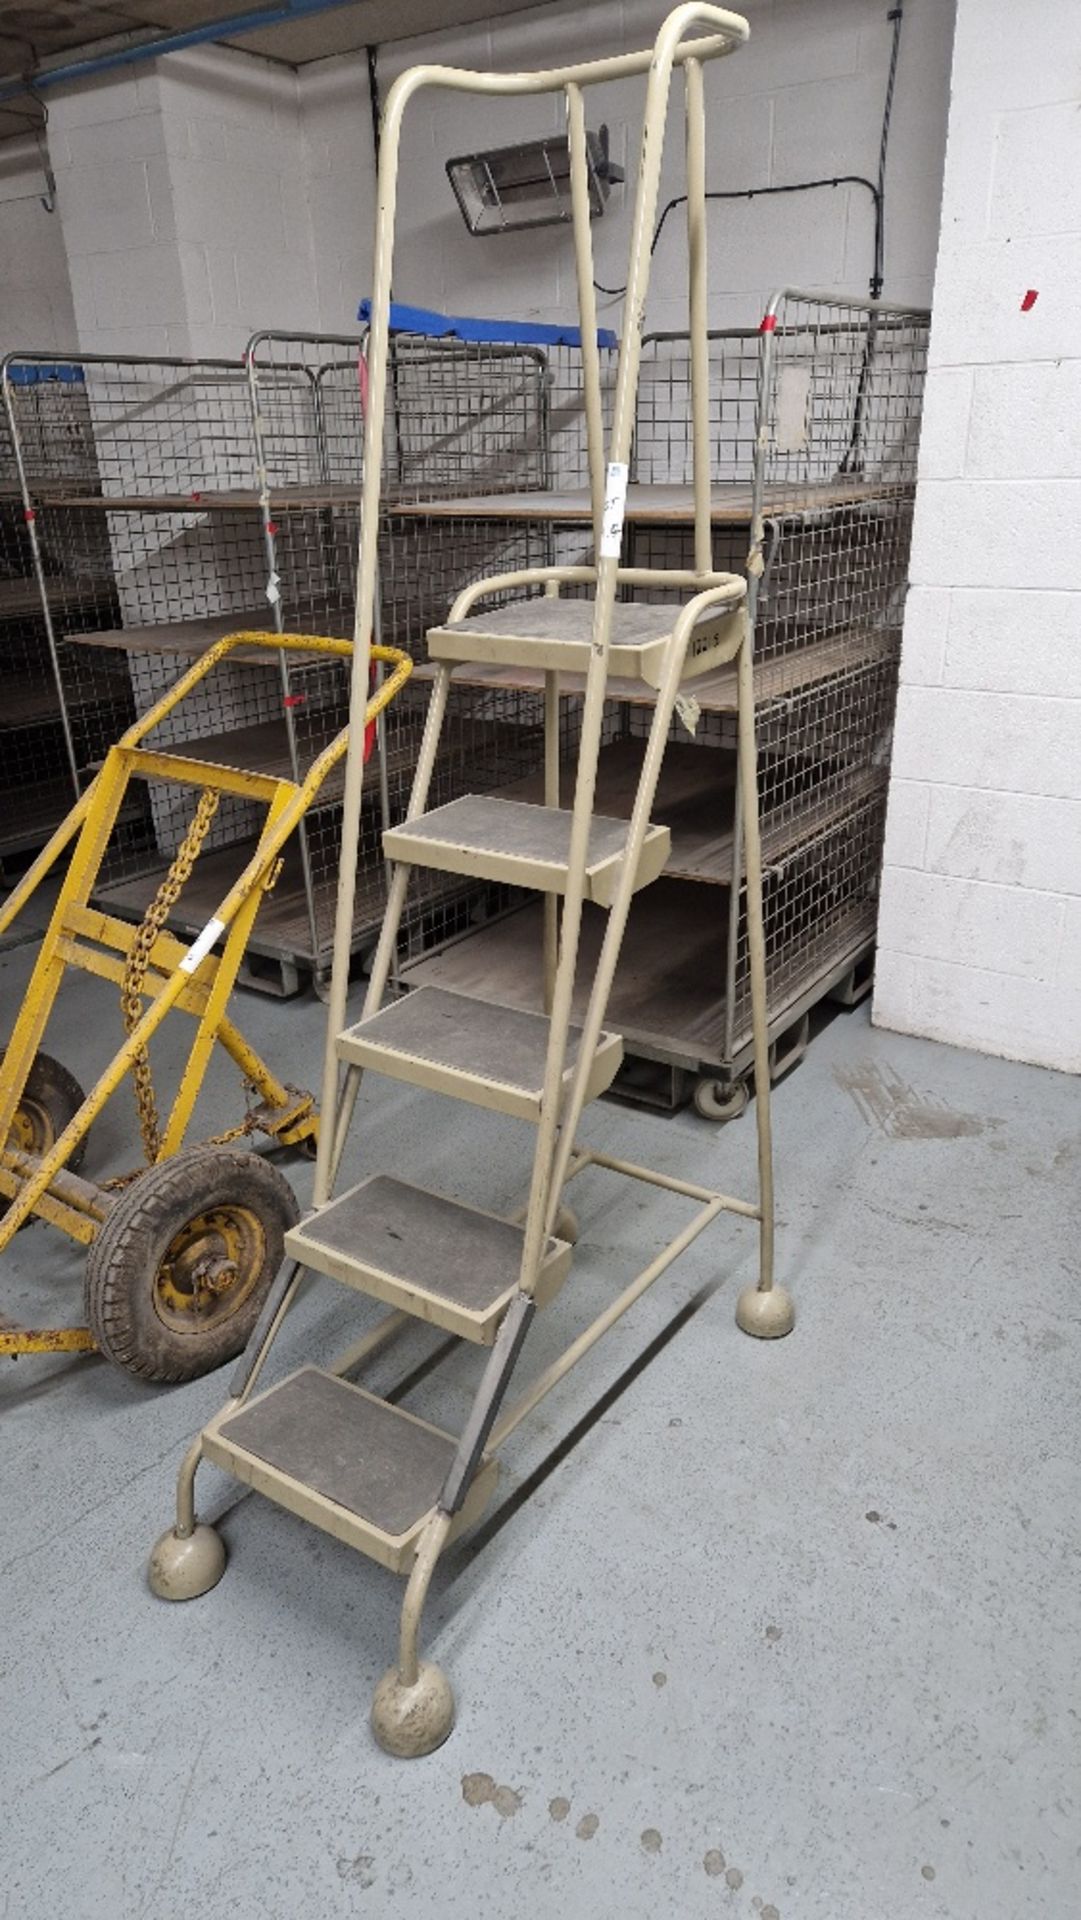 MOBILE STEPS *** PLEASE NOTE THIS ASSET IS LOCATED IN COVENTRY - CV7 *** ACCESS WILL BE GIVEN FOR